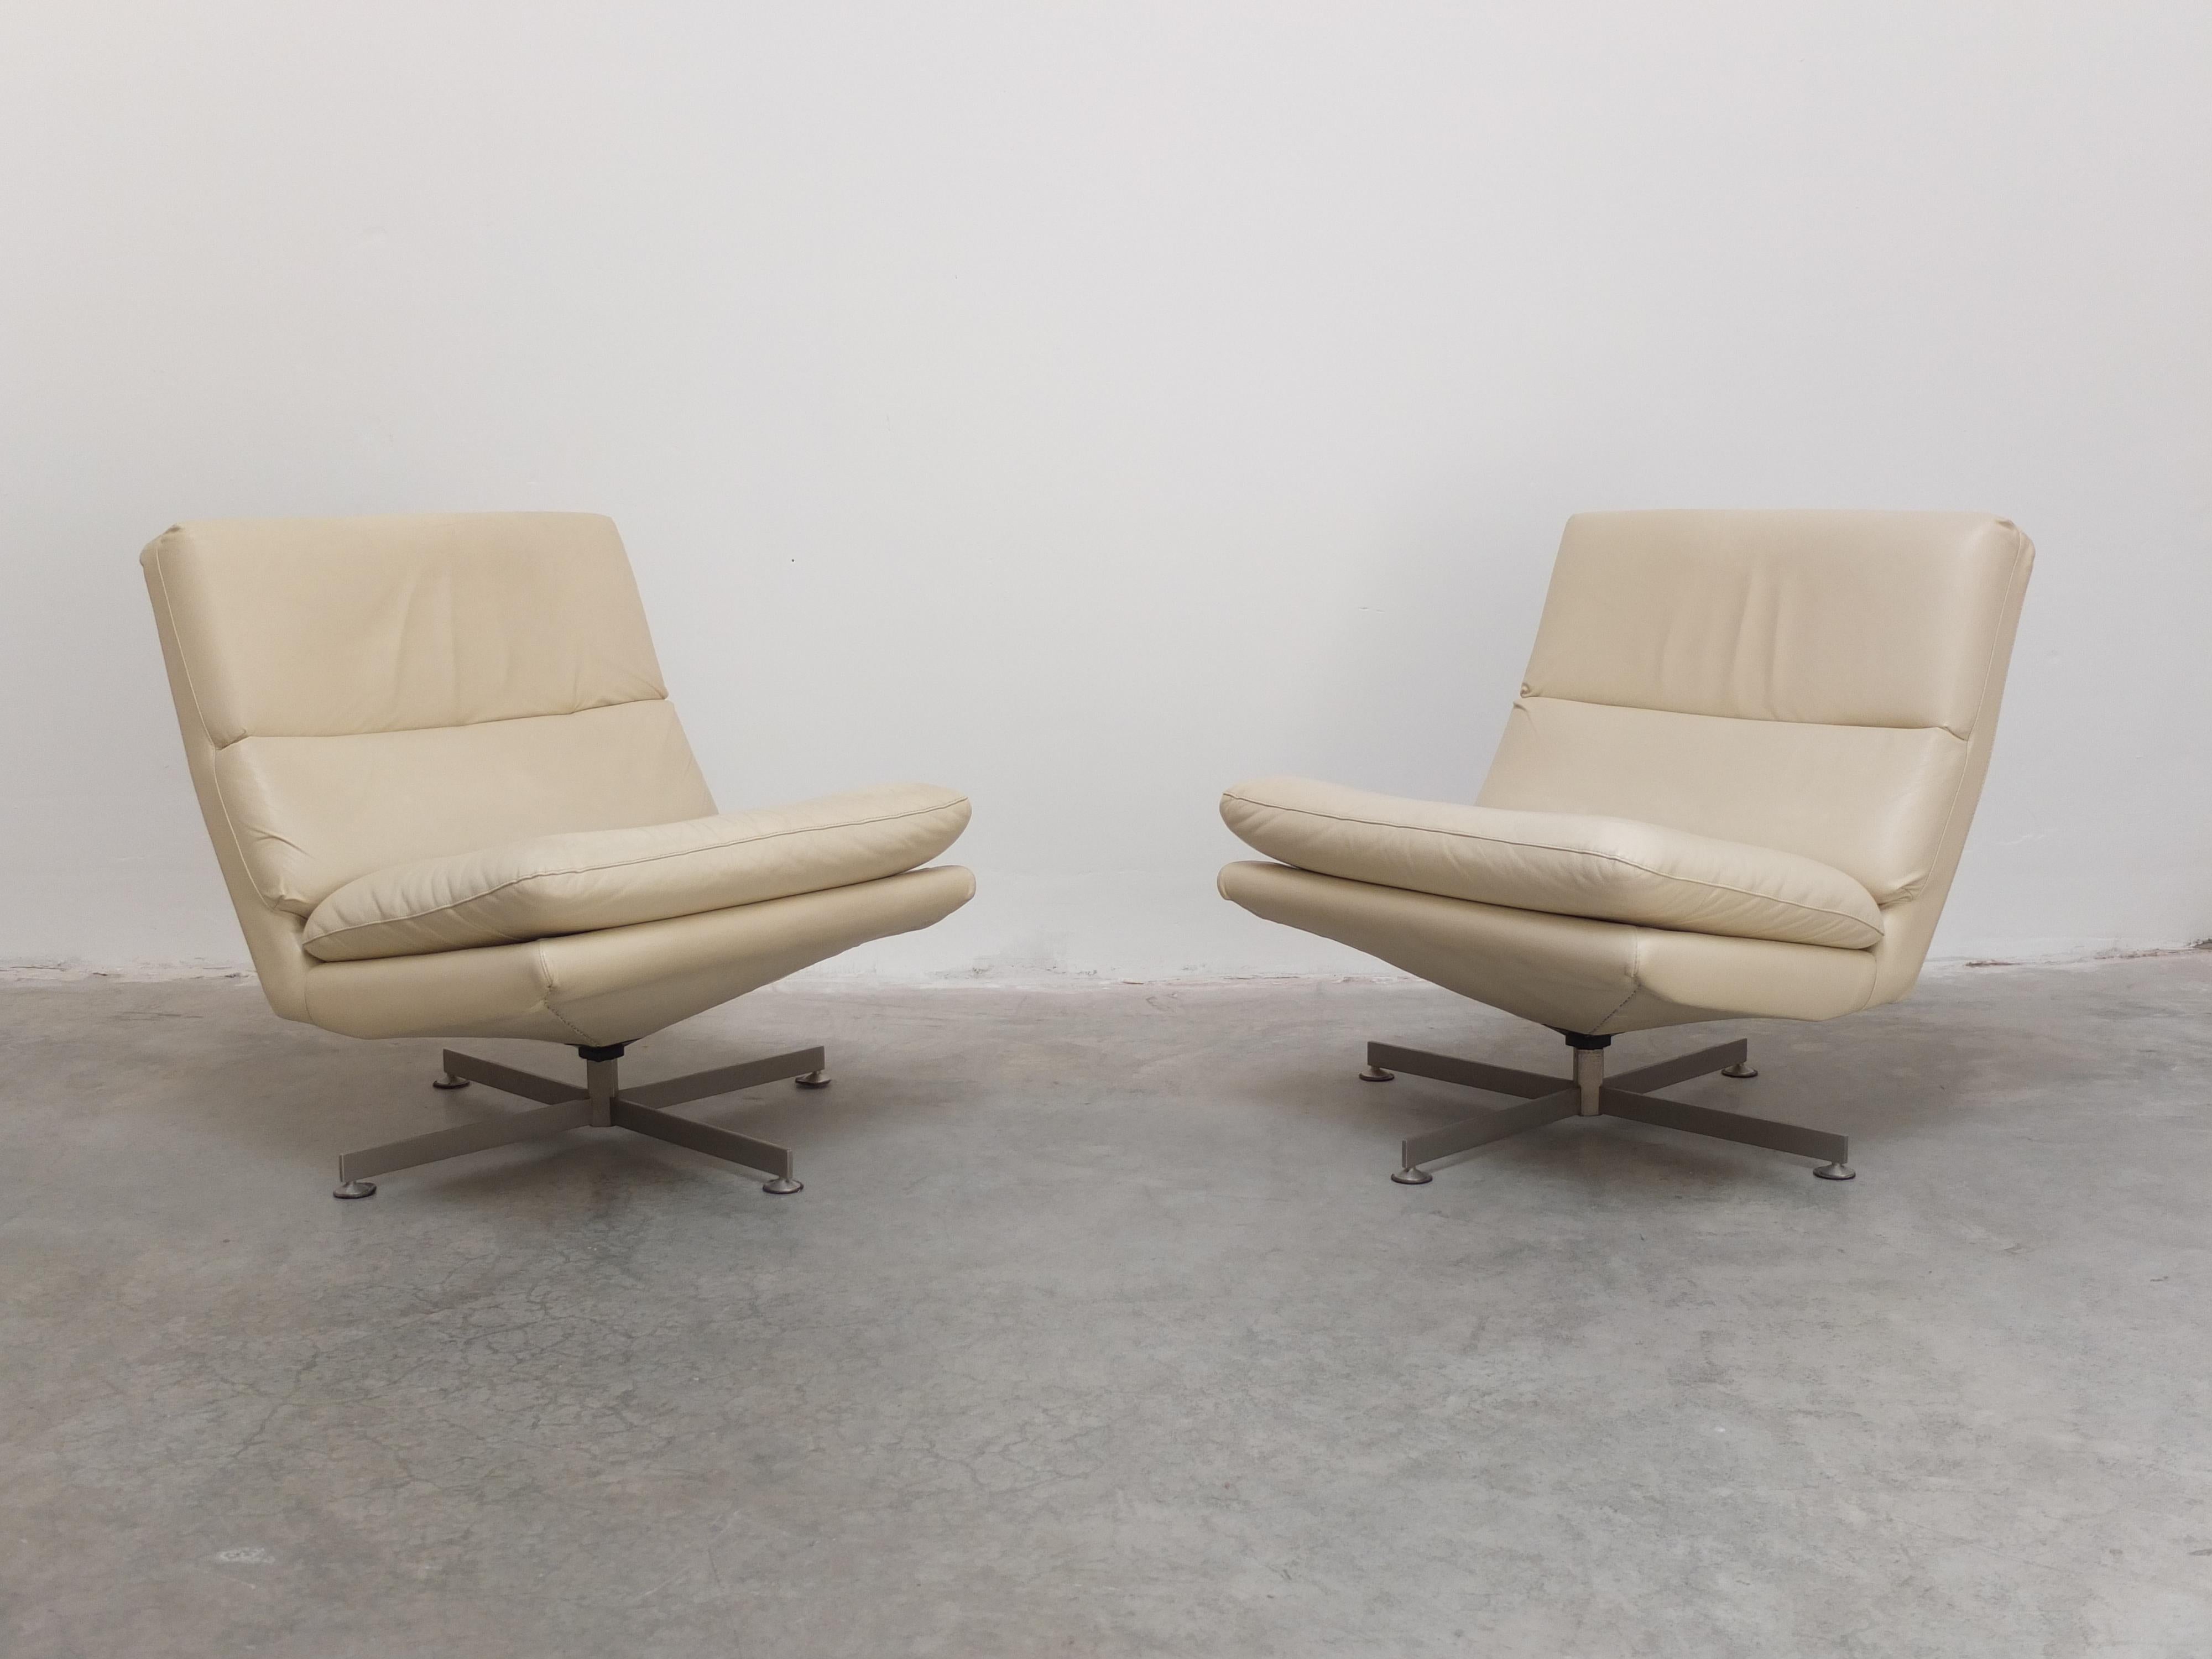 20th Century Belgian Modernist Swivel Lounge Chairs by Georges Van Rijck for Beaufort, 1960s